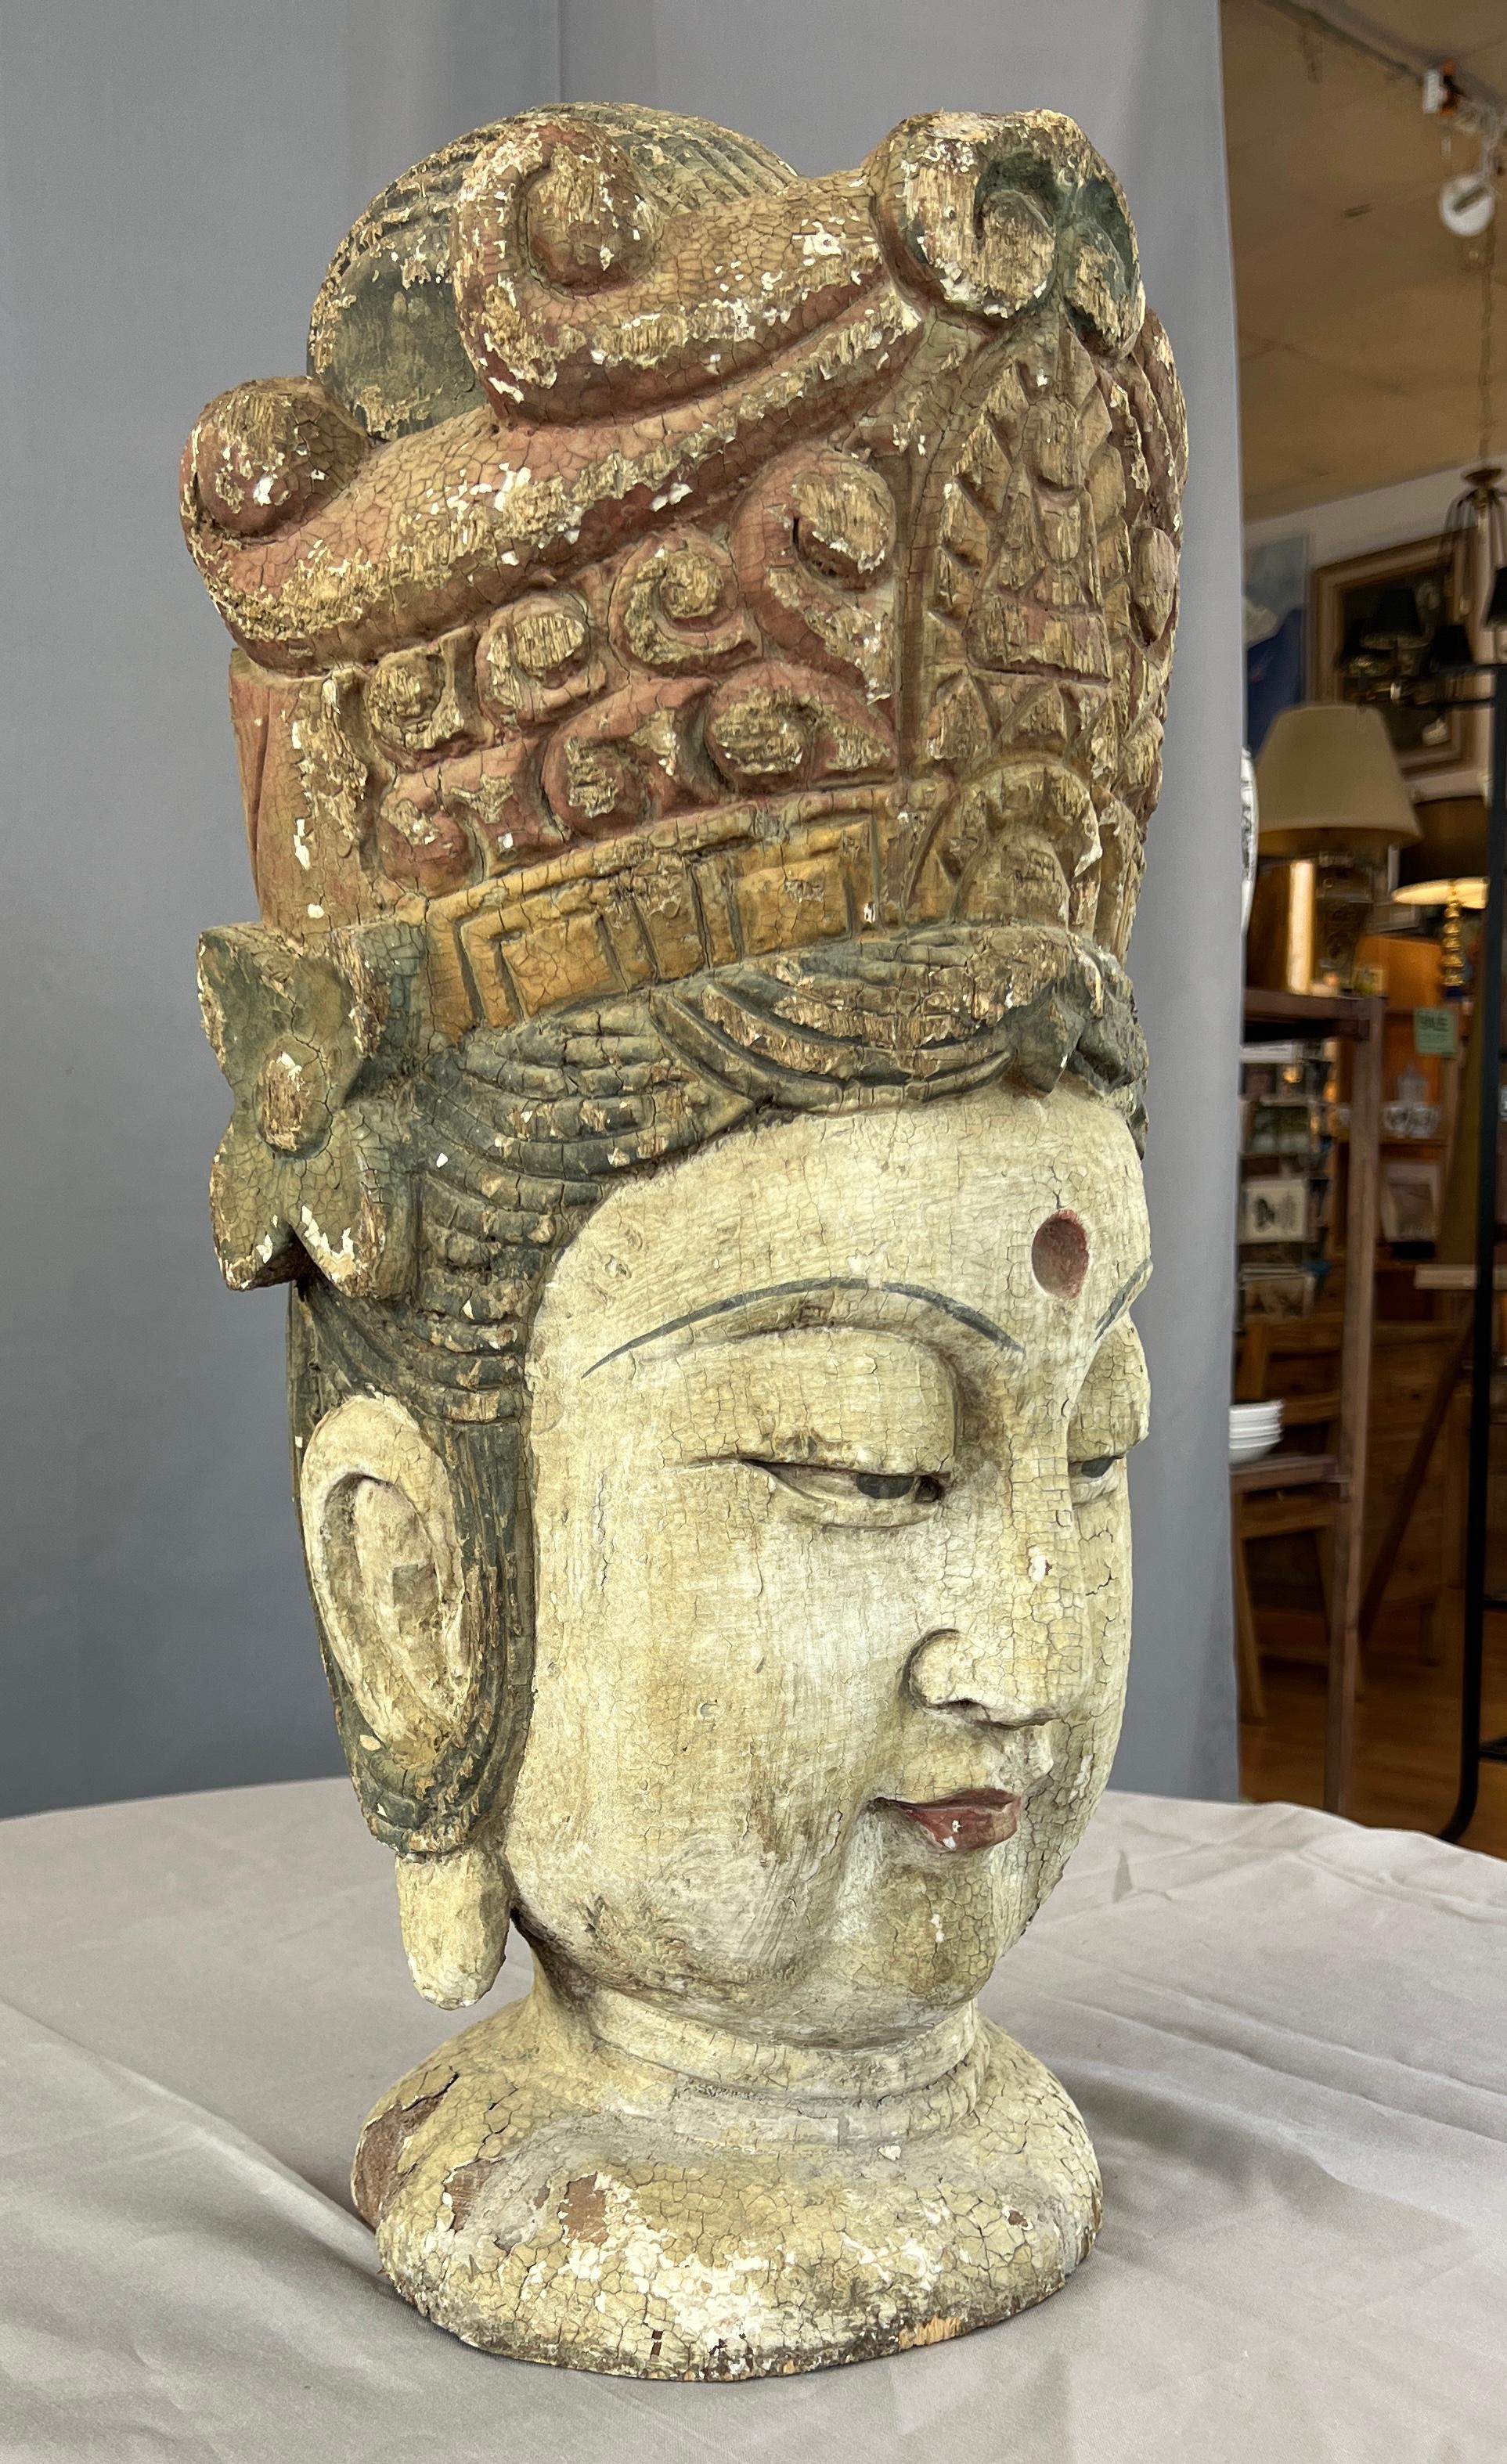 Offered here is a monumental carved wood Quan Yin ( also spelled as Kuan Yin or Guan Yin) bust, from the Qing dynasty.
Has export wax stamp on top.

